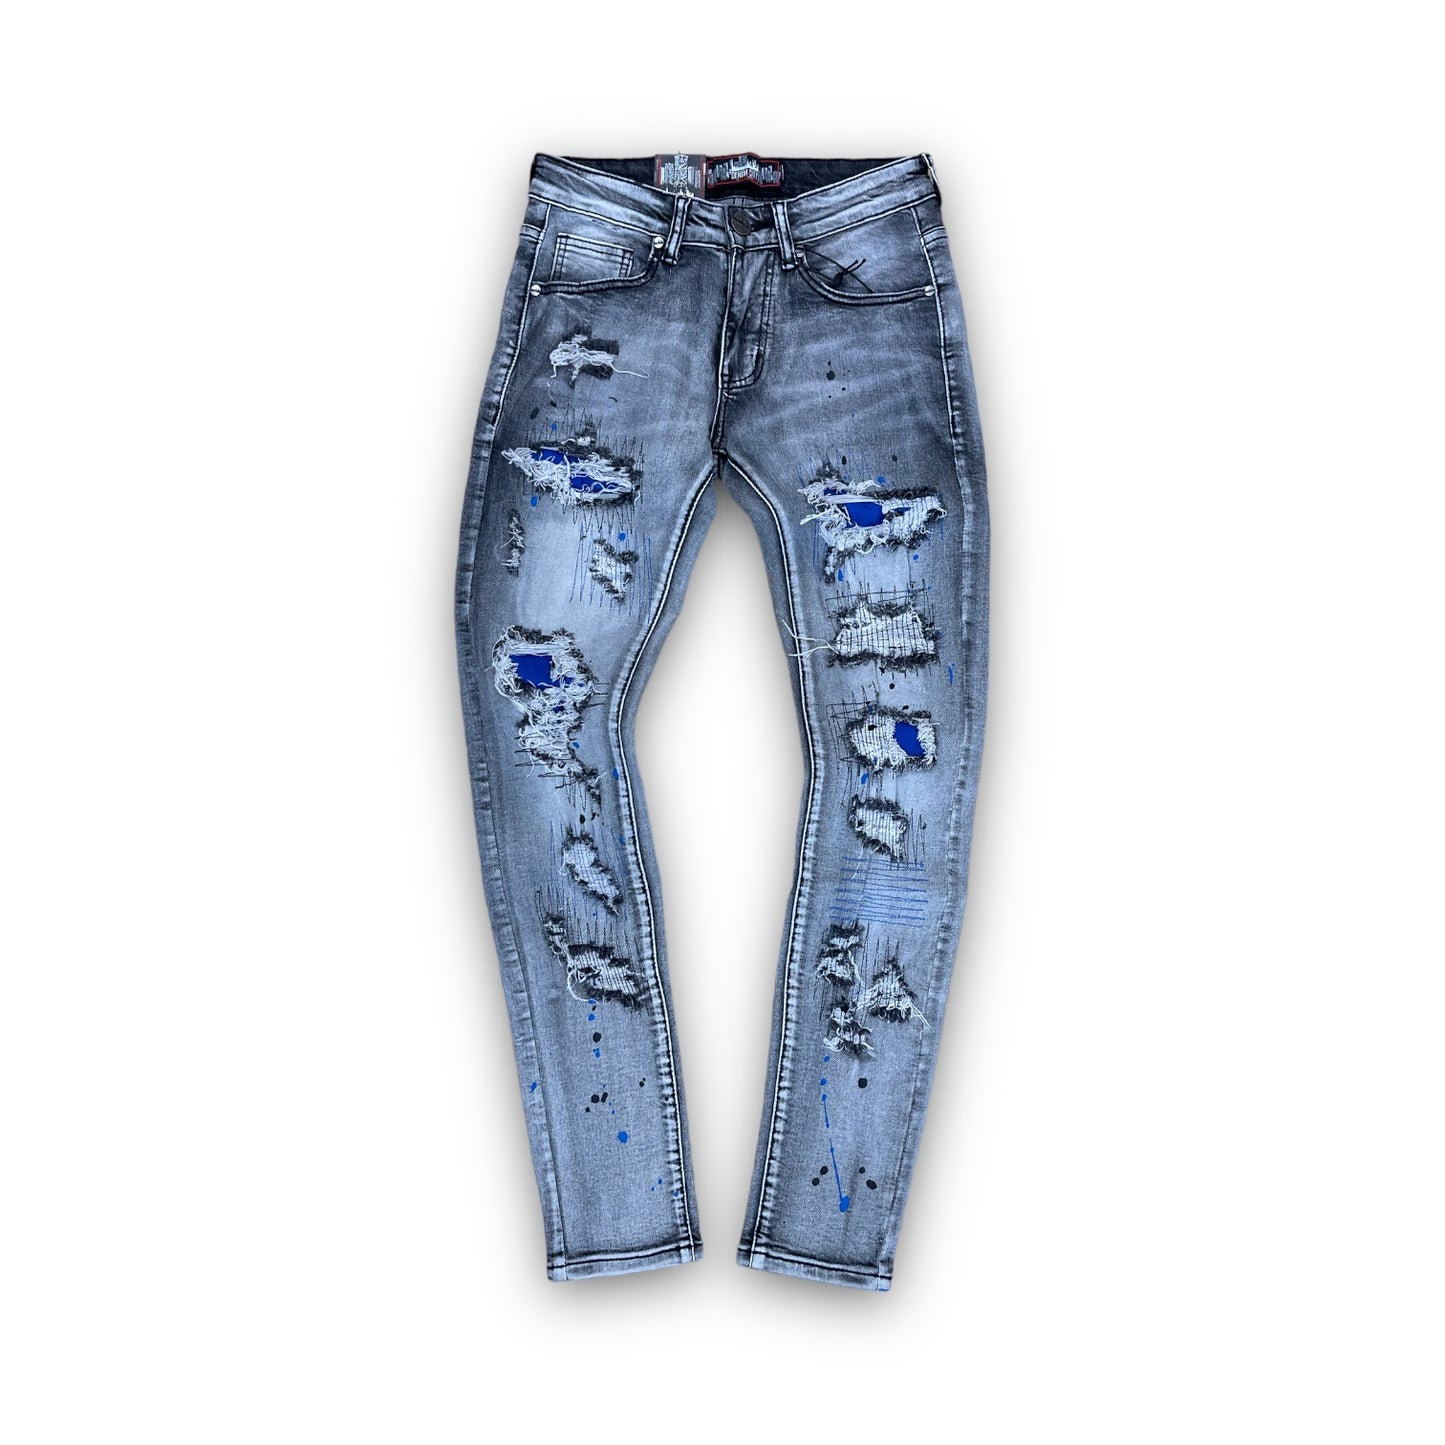 DenimiCity MID GREY BLUE PATCHES JEANS